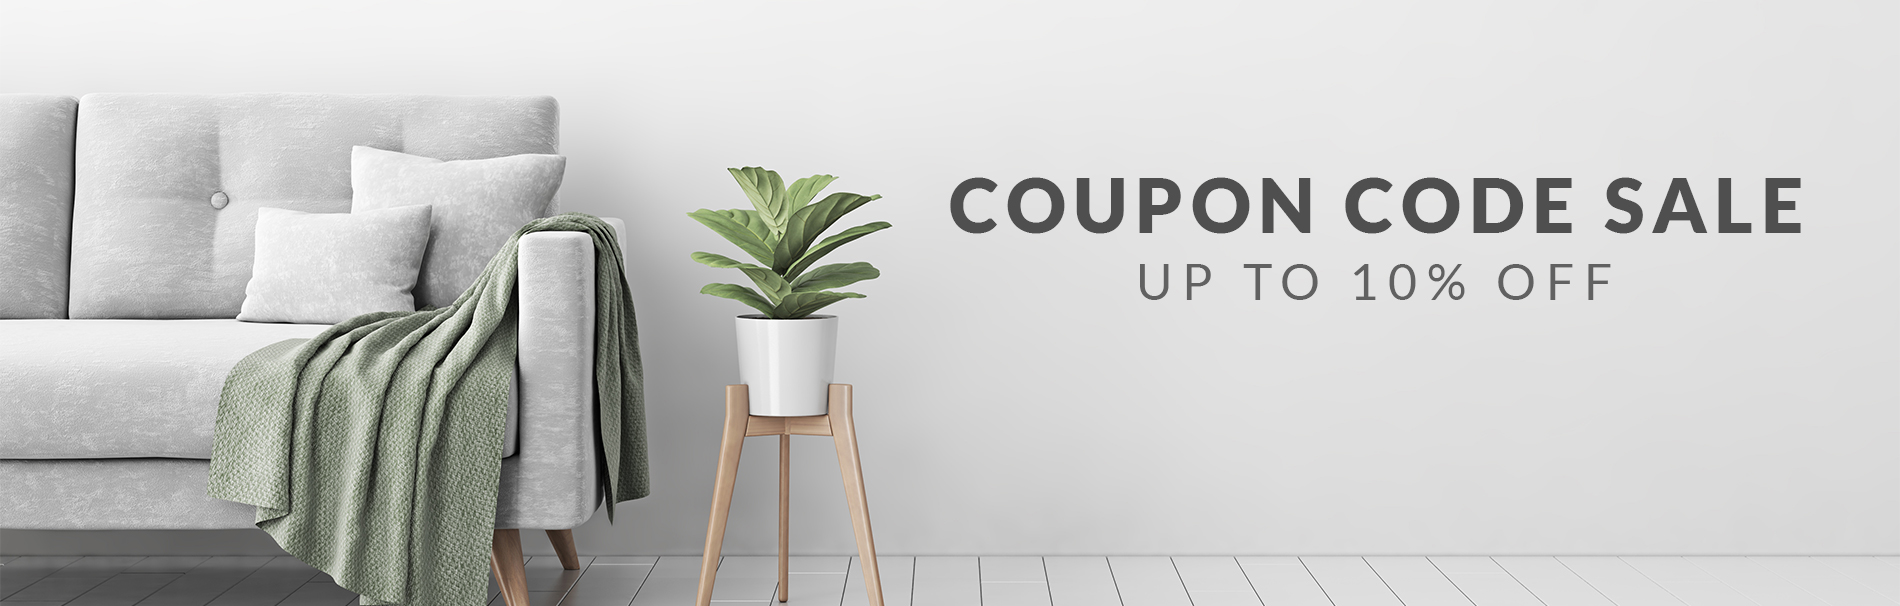 coupon-banner-page.jpg